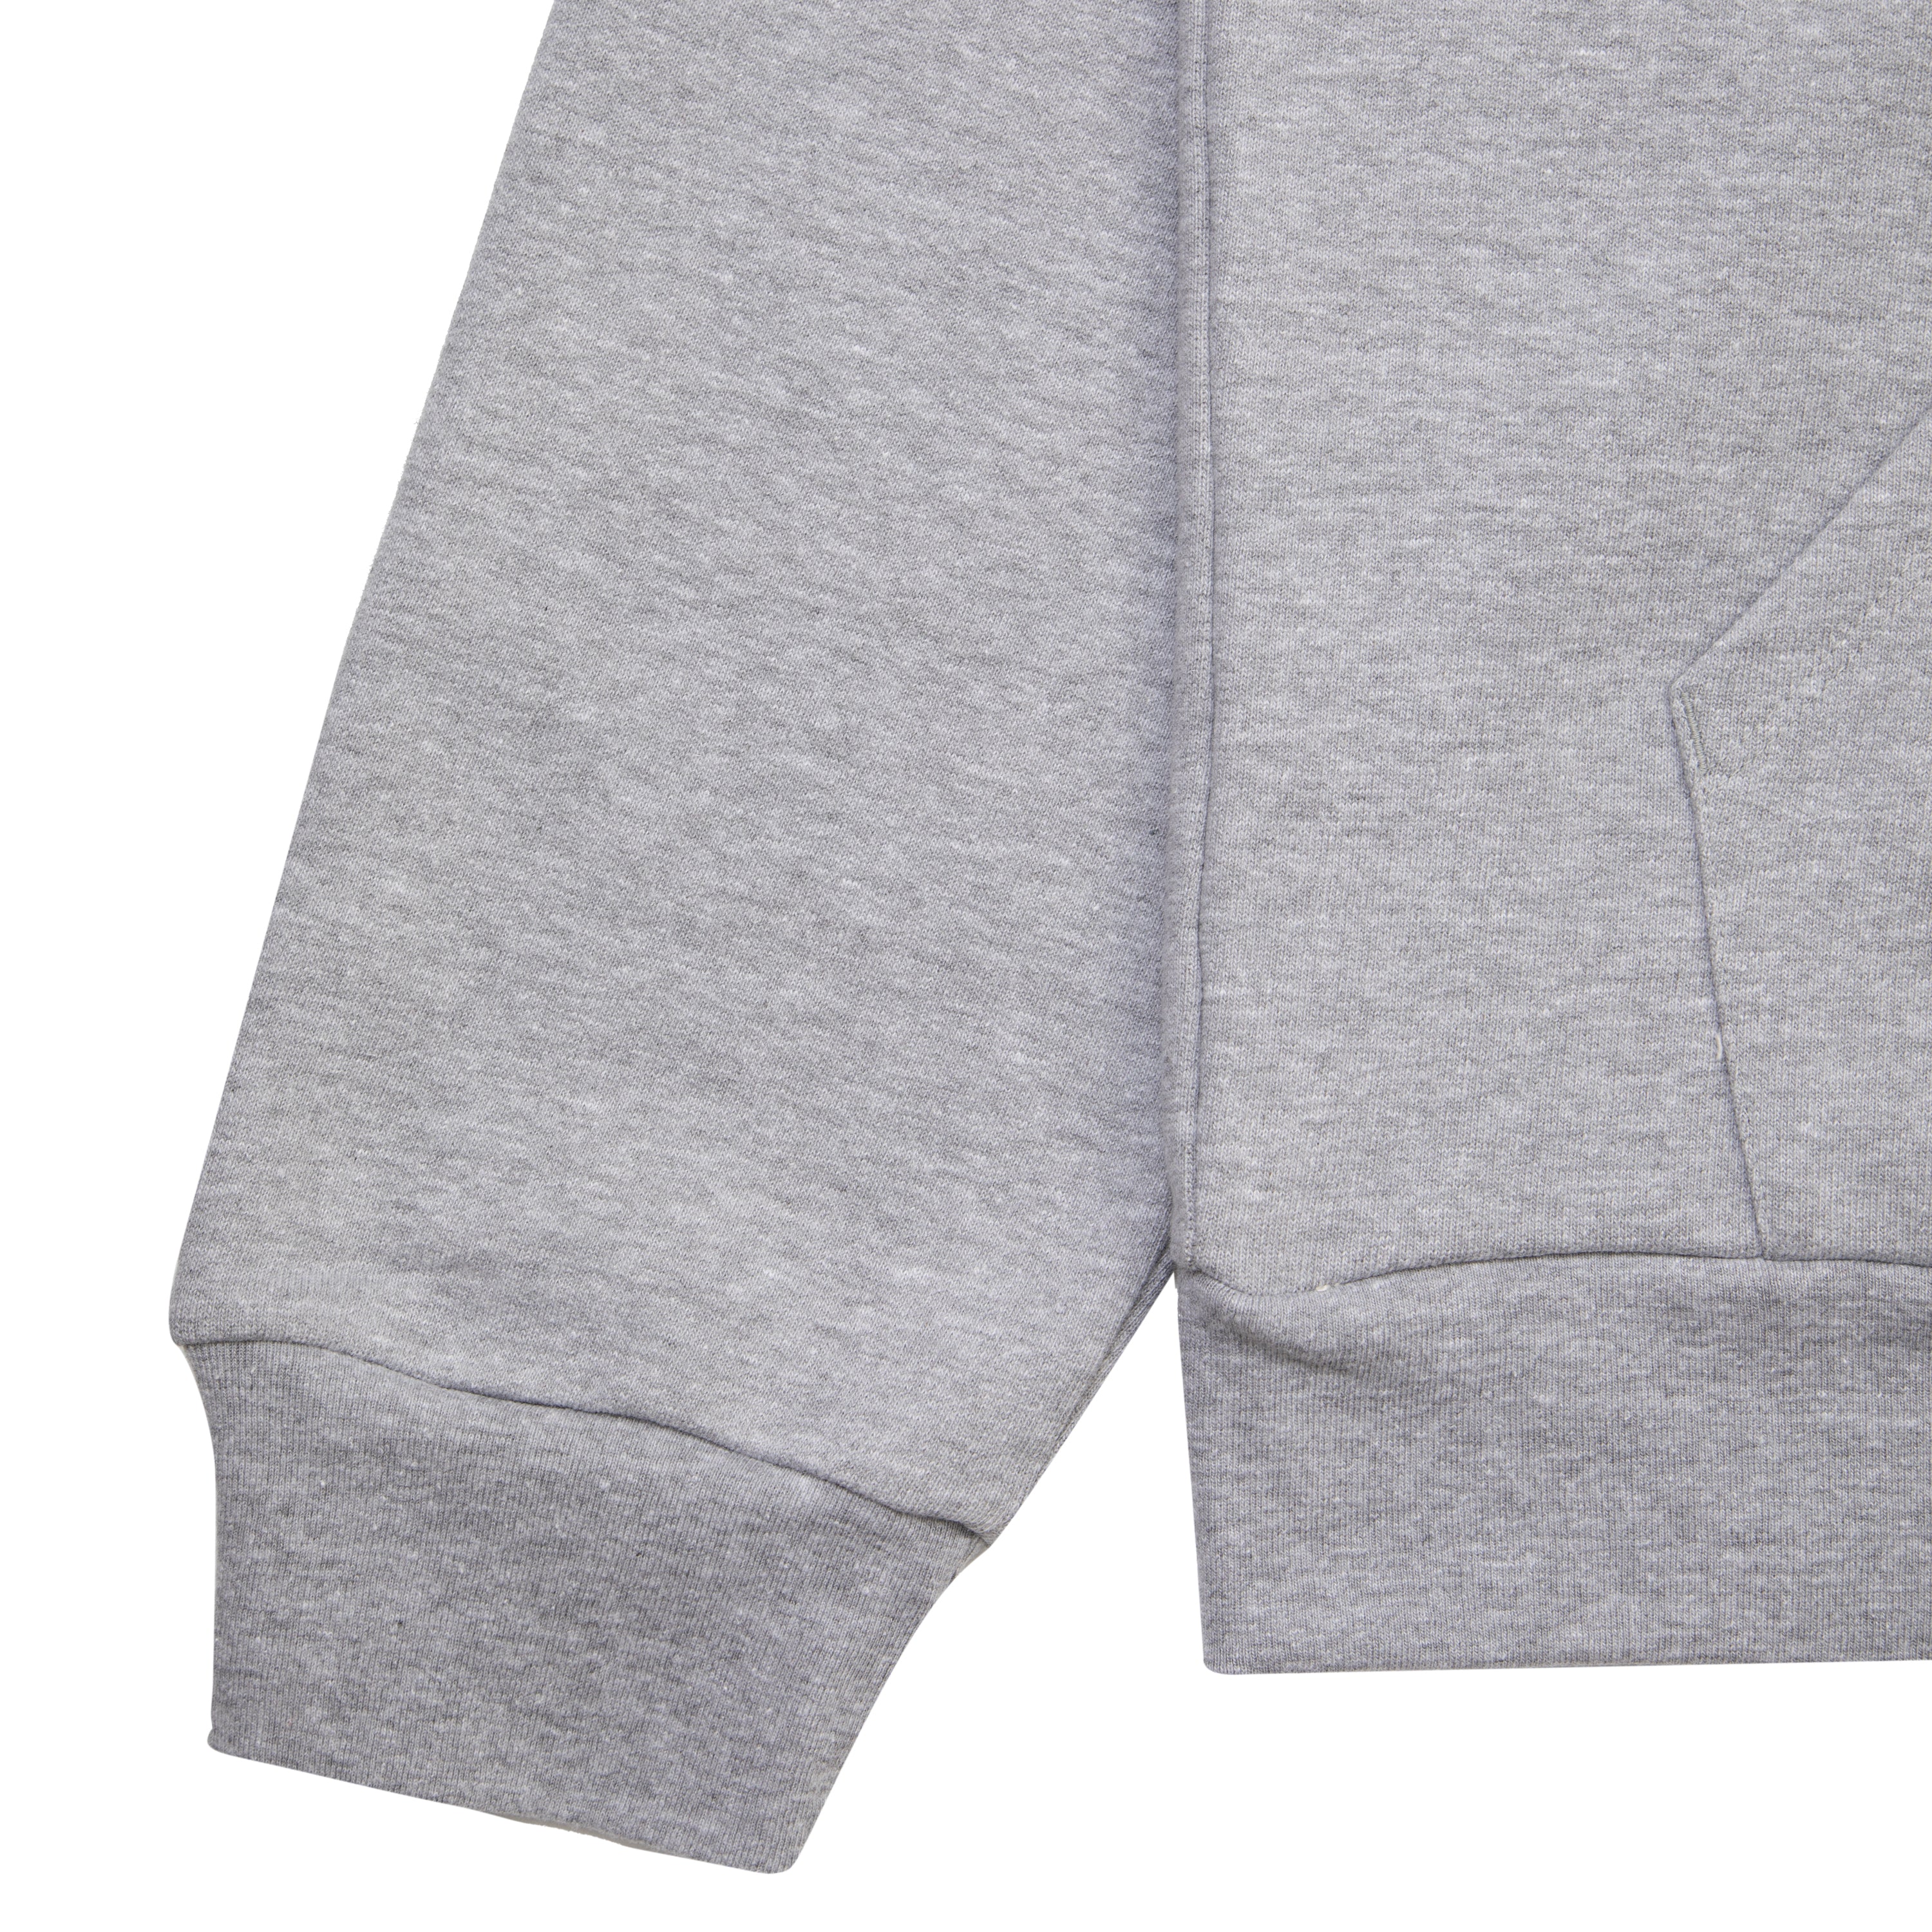 TIRED'S HOODIE HEATHER GREY – tired skateboards